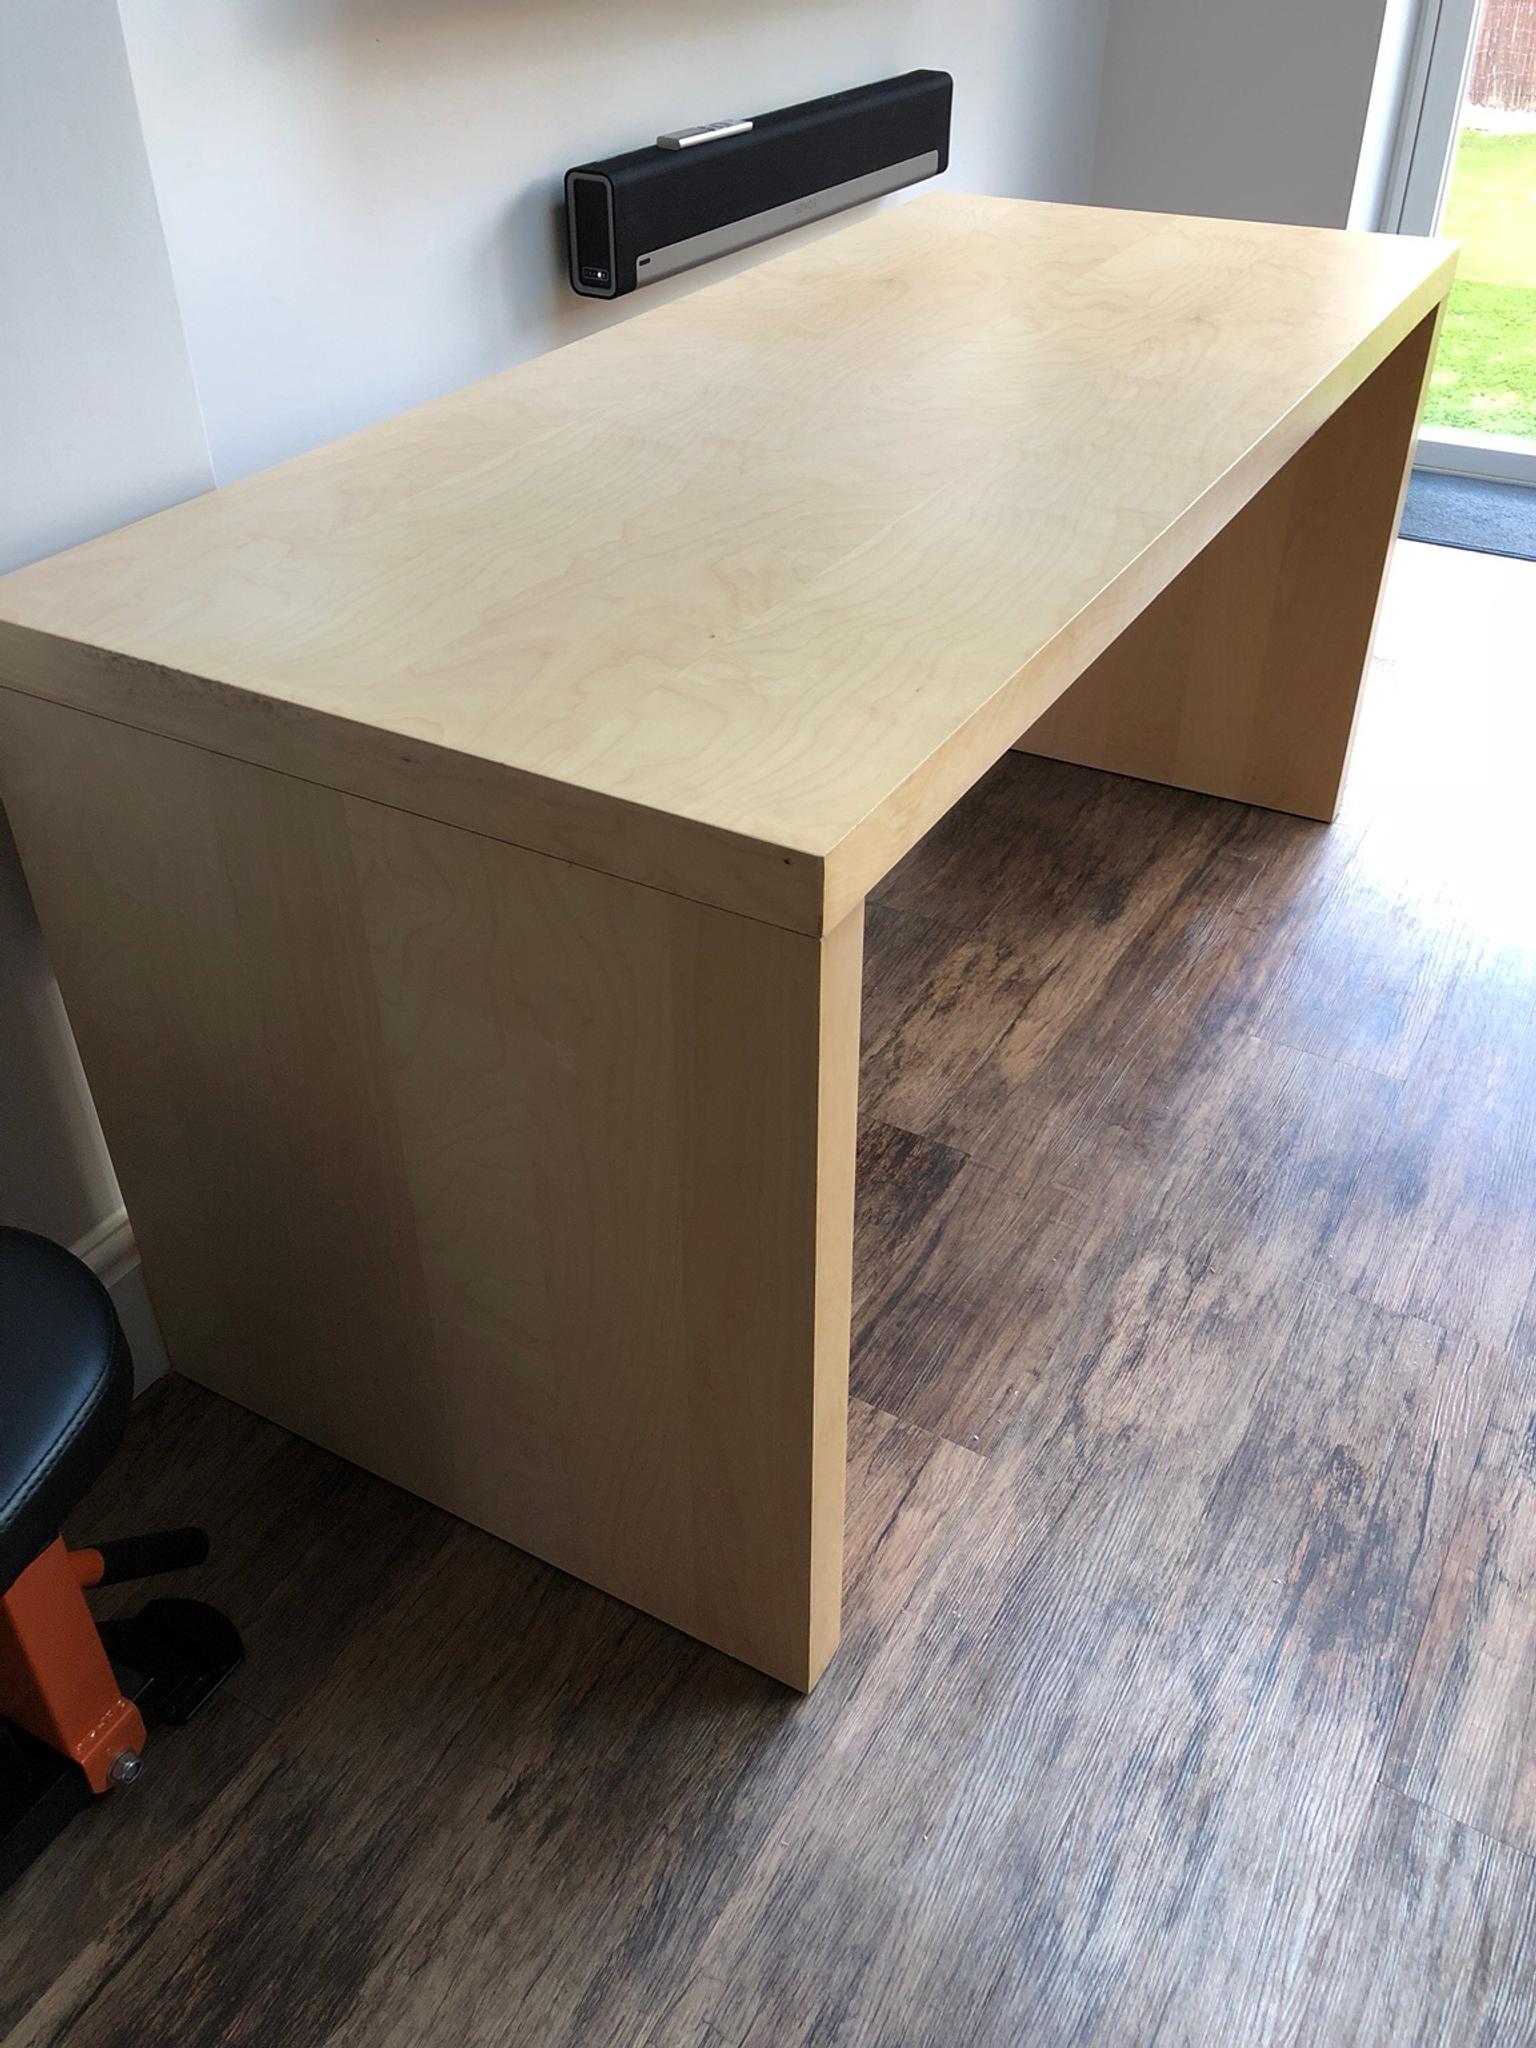 Ikea Jonas Computer Pc Desk In Cm14 Brentwood For 30 00 For Sale